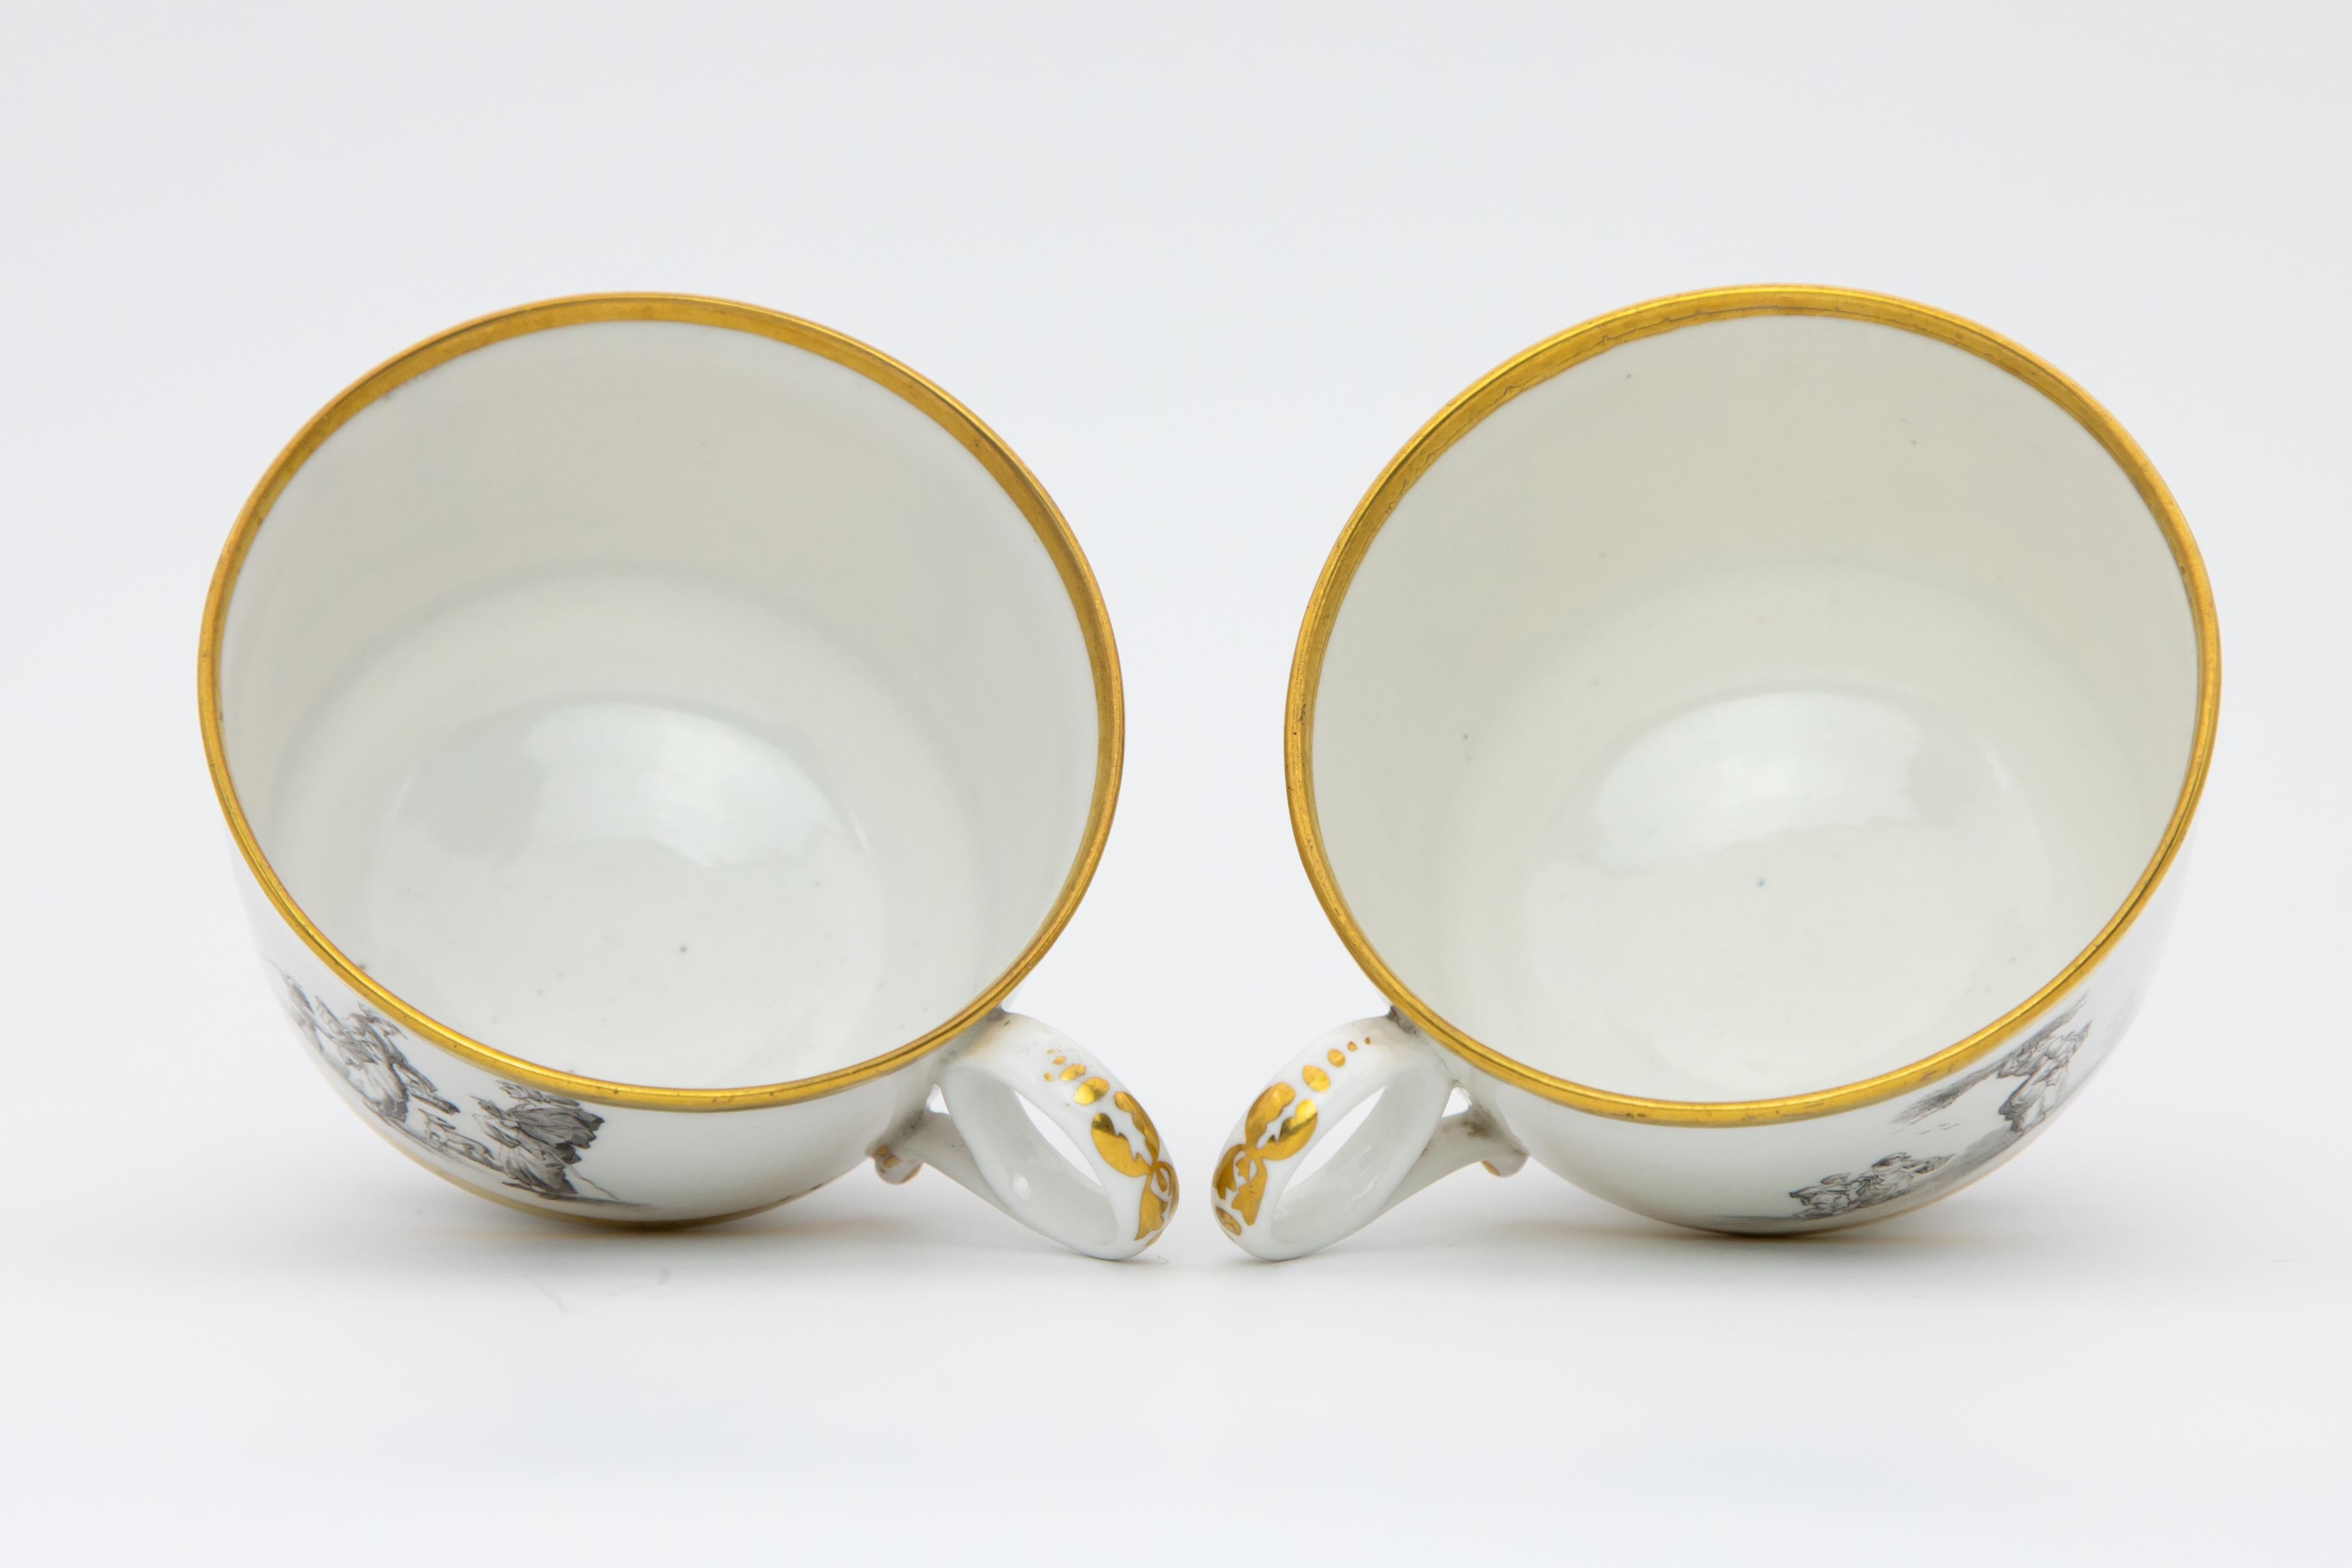 Pair of Early Barr Flight Barr Porcelain Teacups and Saucers For Sale 5